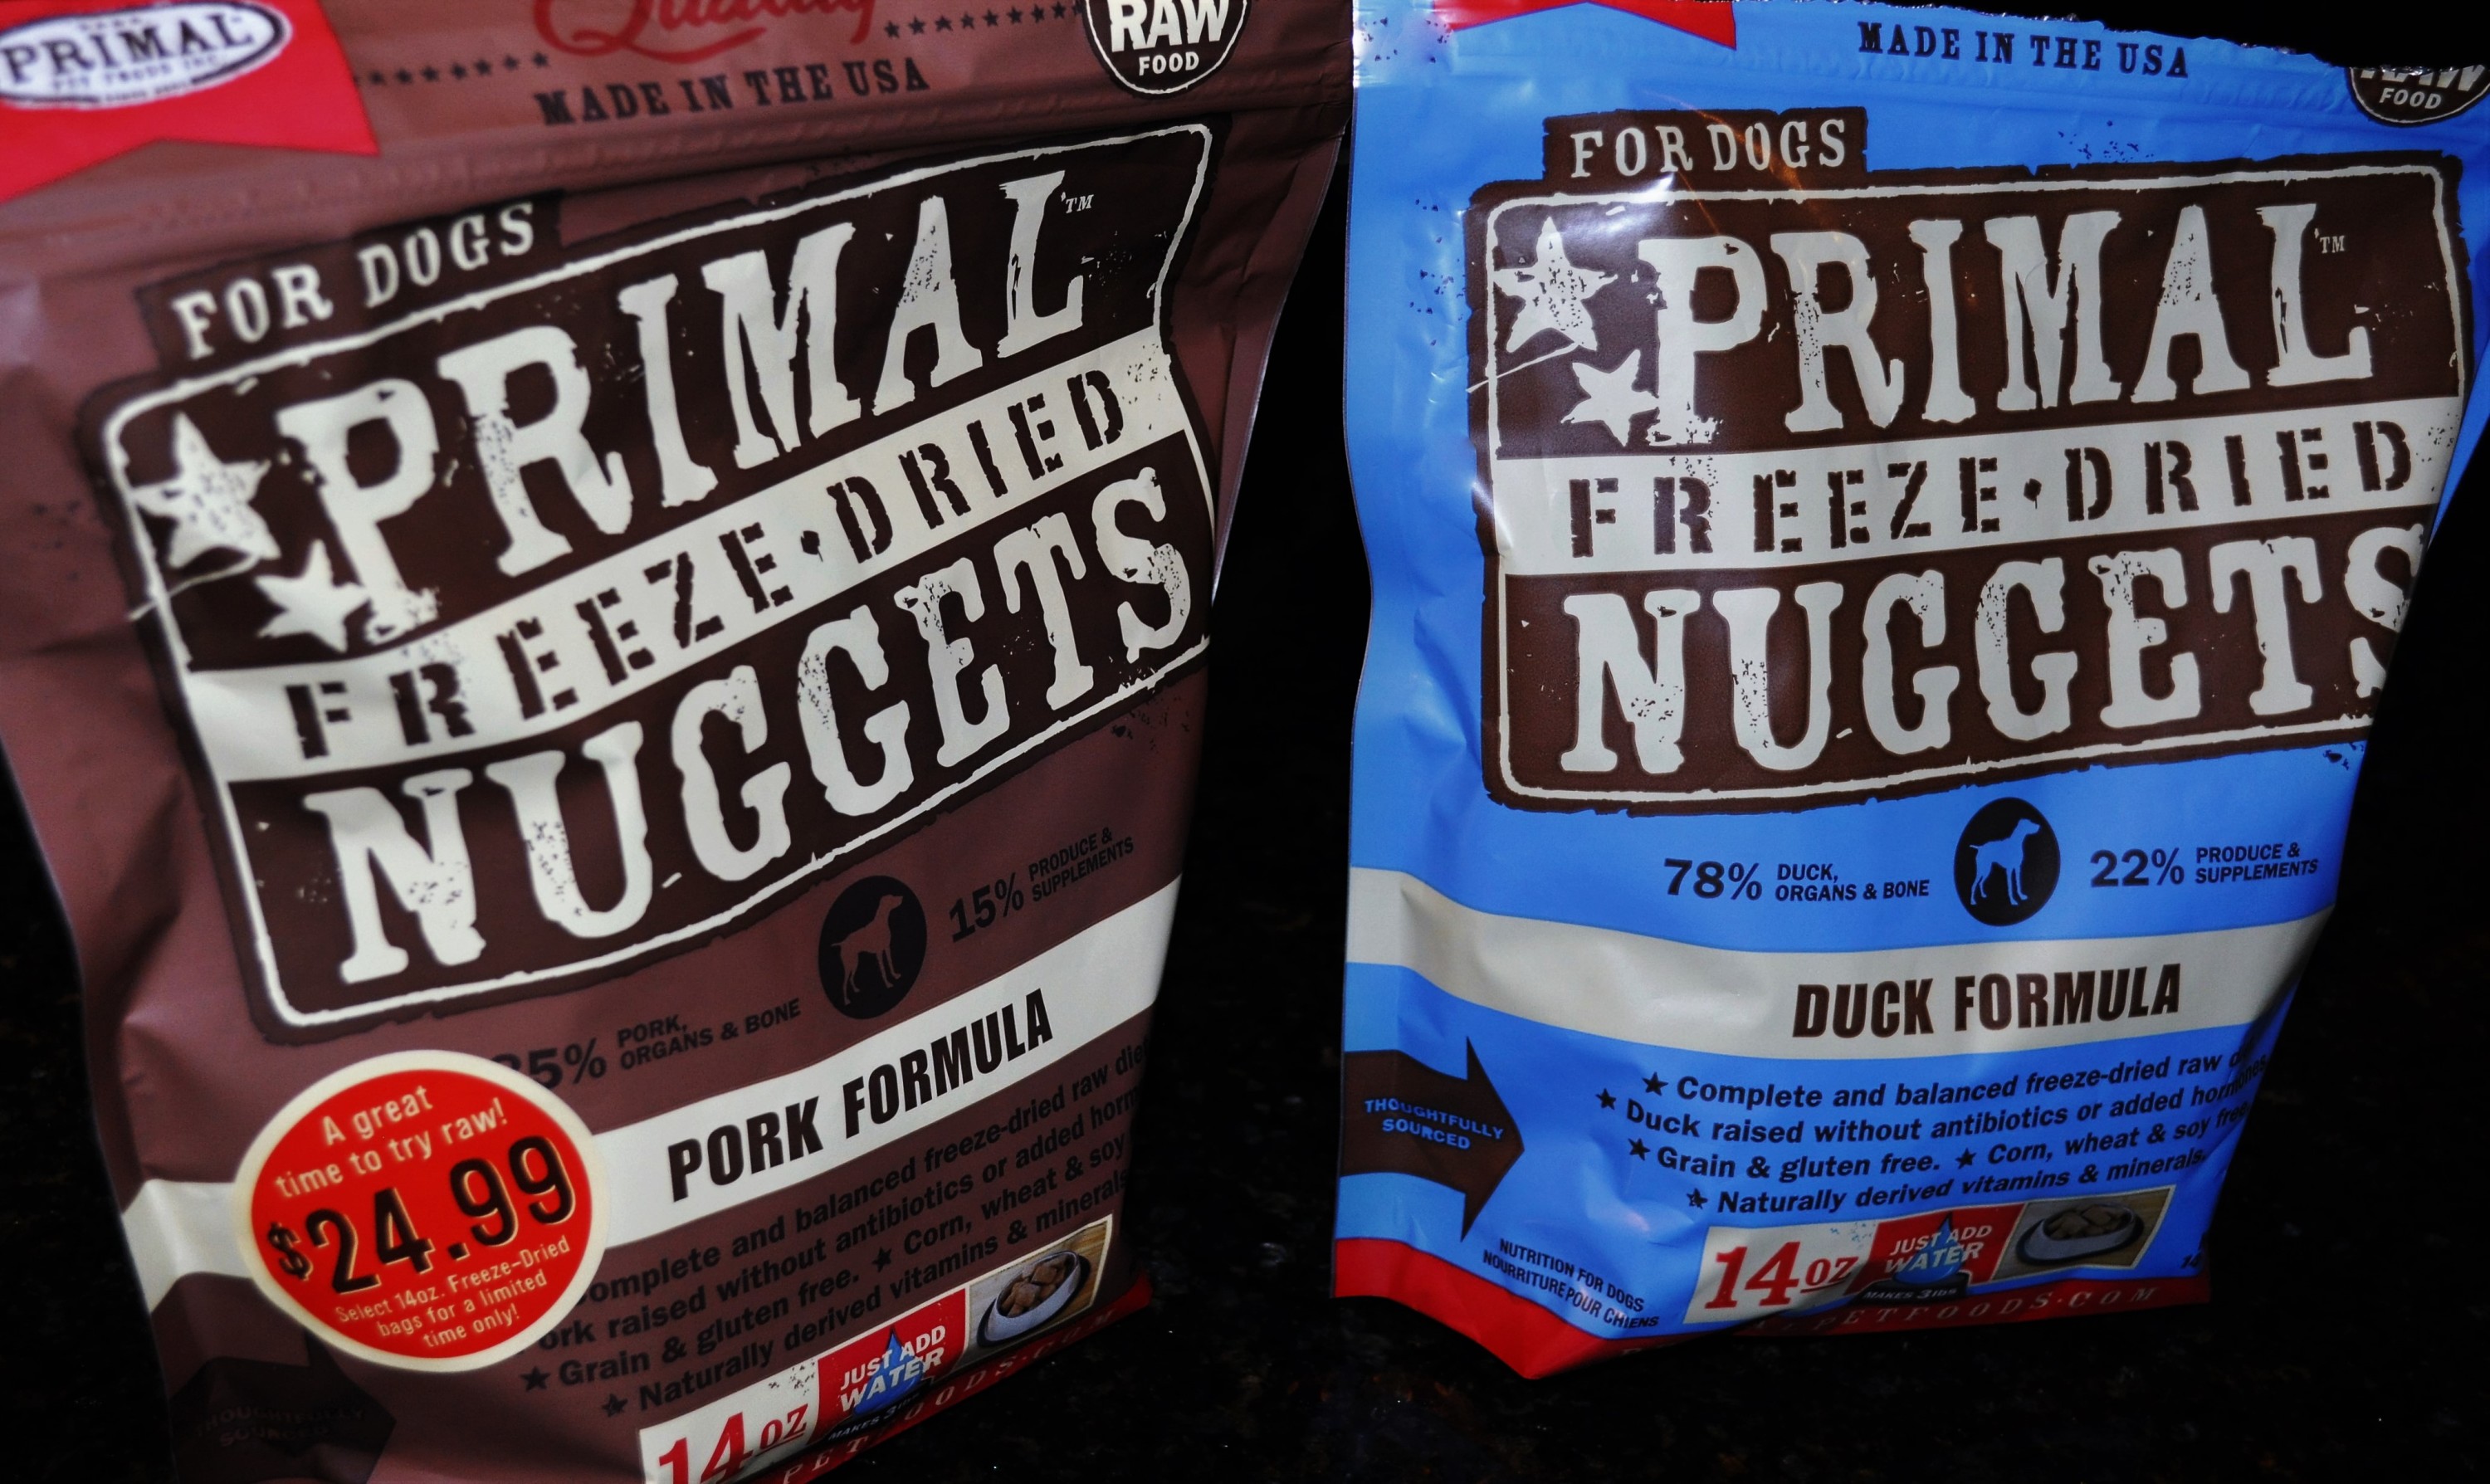 Primal Freeze Dried Nuggets Bags